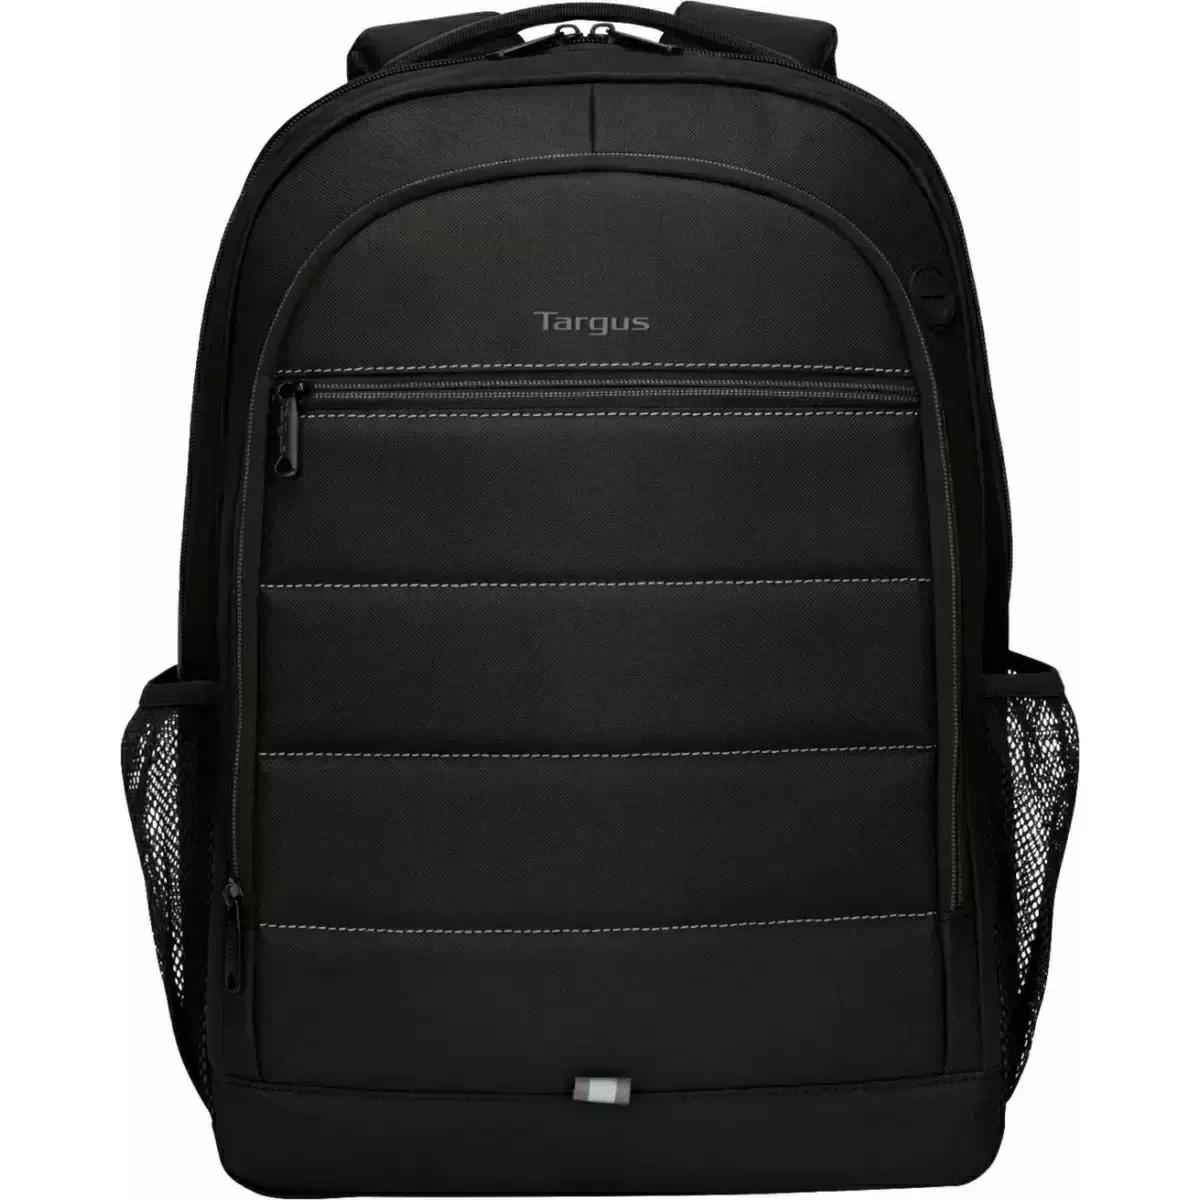 Targus Octave 15.6in Laptop Backpack for $9.99